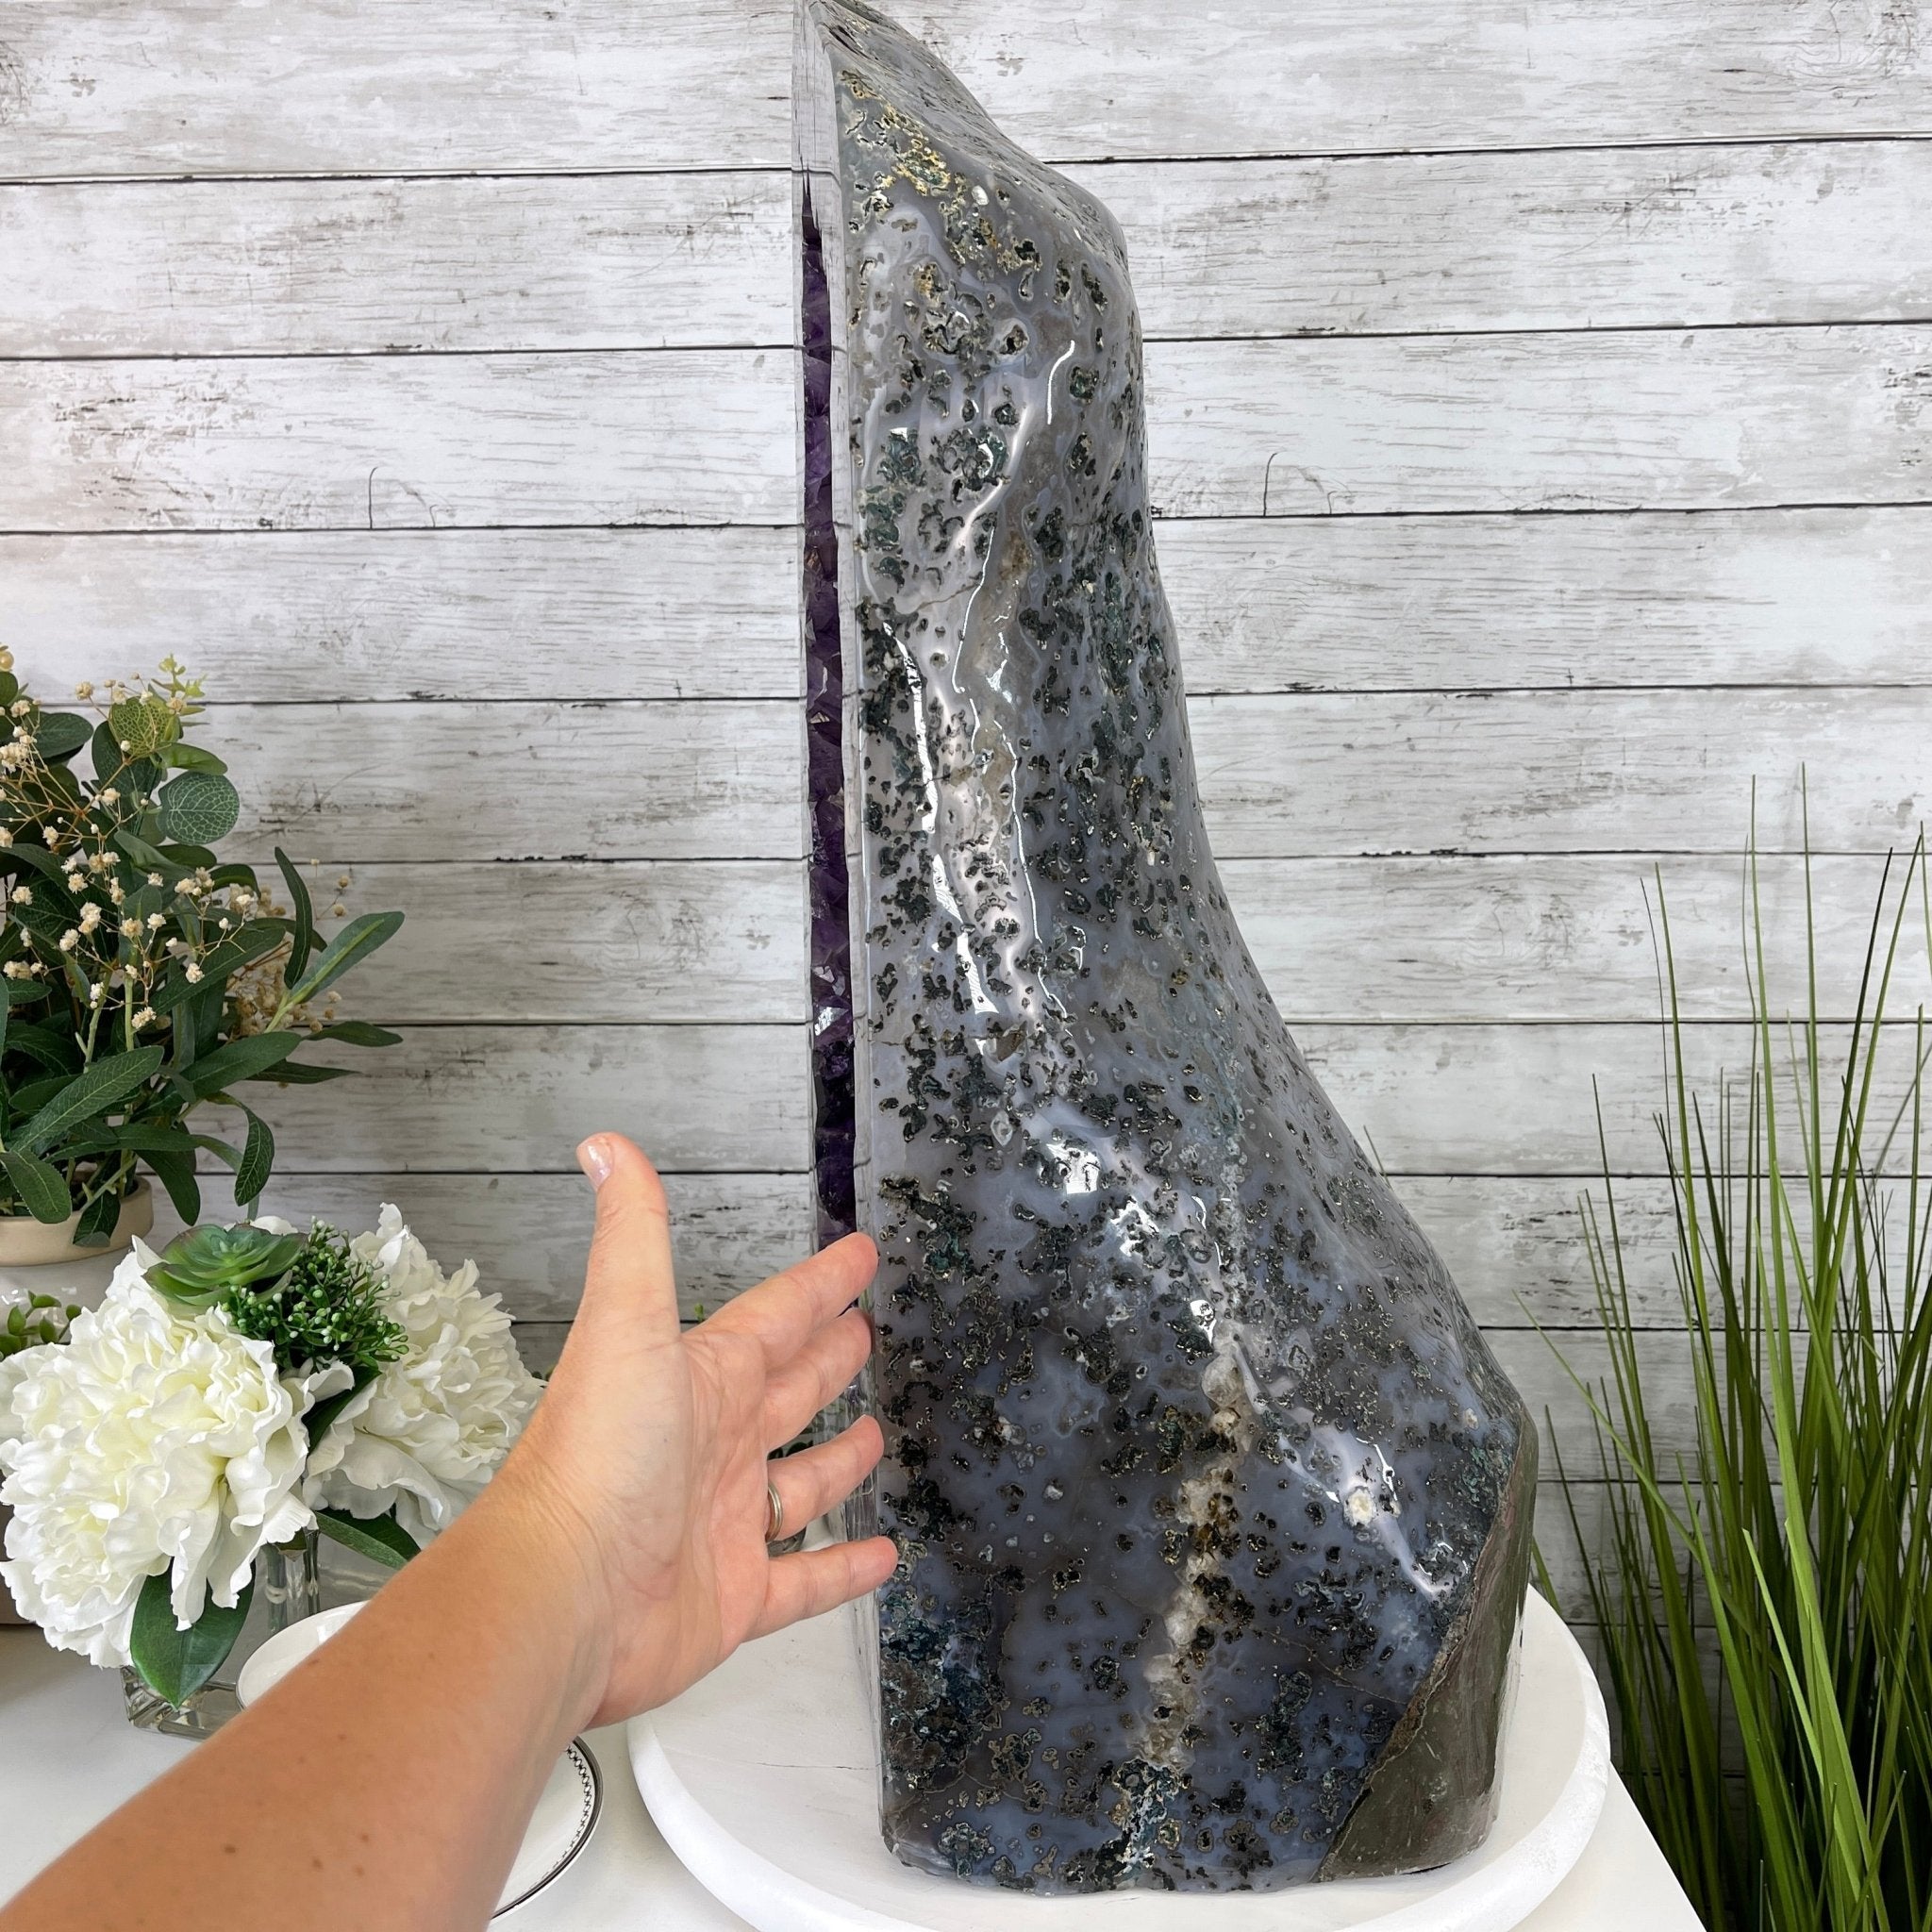 Extra Quality Polished Brazilian Amethyst Cathedral, 95.2 lbs & 24.6" tall Model #5602-0139 by Brazil Gems - Brazil GemsBrazil GemsExtra Quality Polished Brazilian Amethyst Cathedral, 95.2 lbs & 24.6" tall Model #5602-0139 by Brazil GemsPolished Cathedrals5602-0139